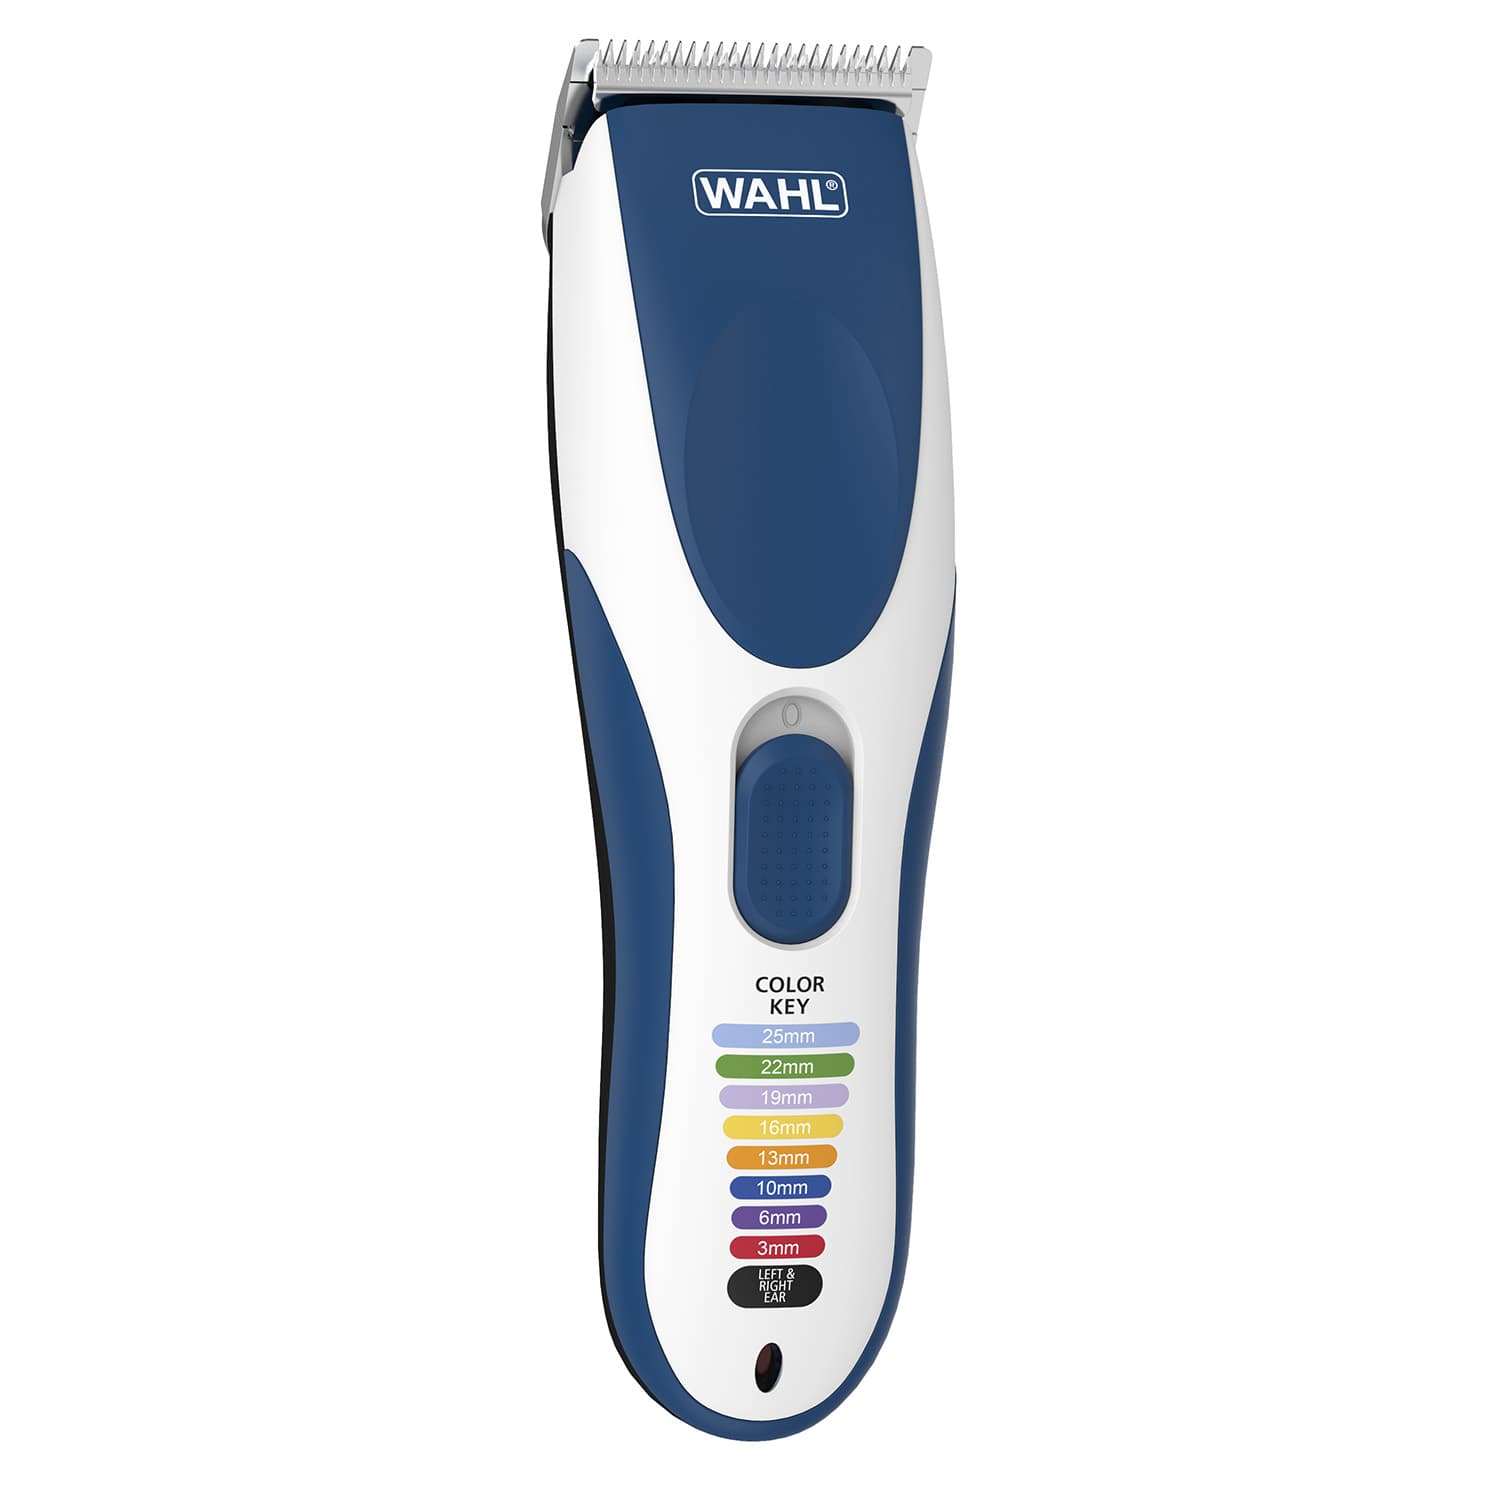 Wahl Color Pro 19-Piece Cord/Cordless Hair Clipper